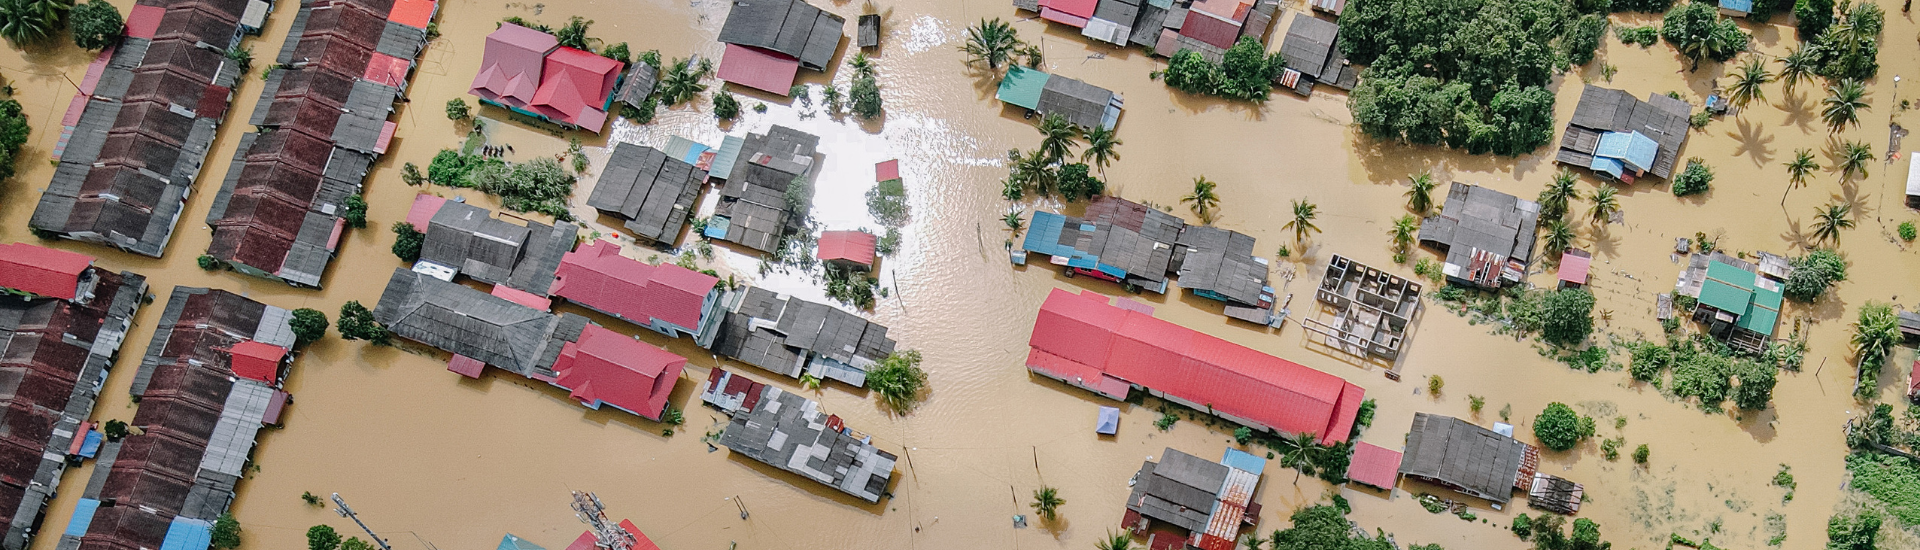 IPCC issues its starkest warning yet on the climate crisis; Ceres urges government and capital market leaders to respond with stepped-up action